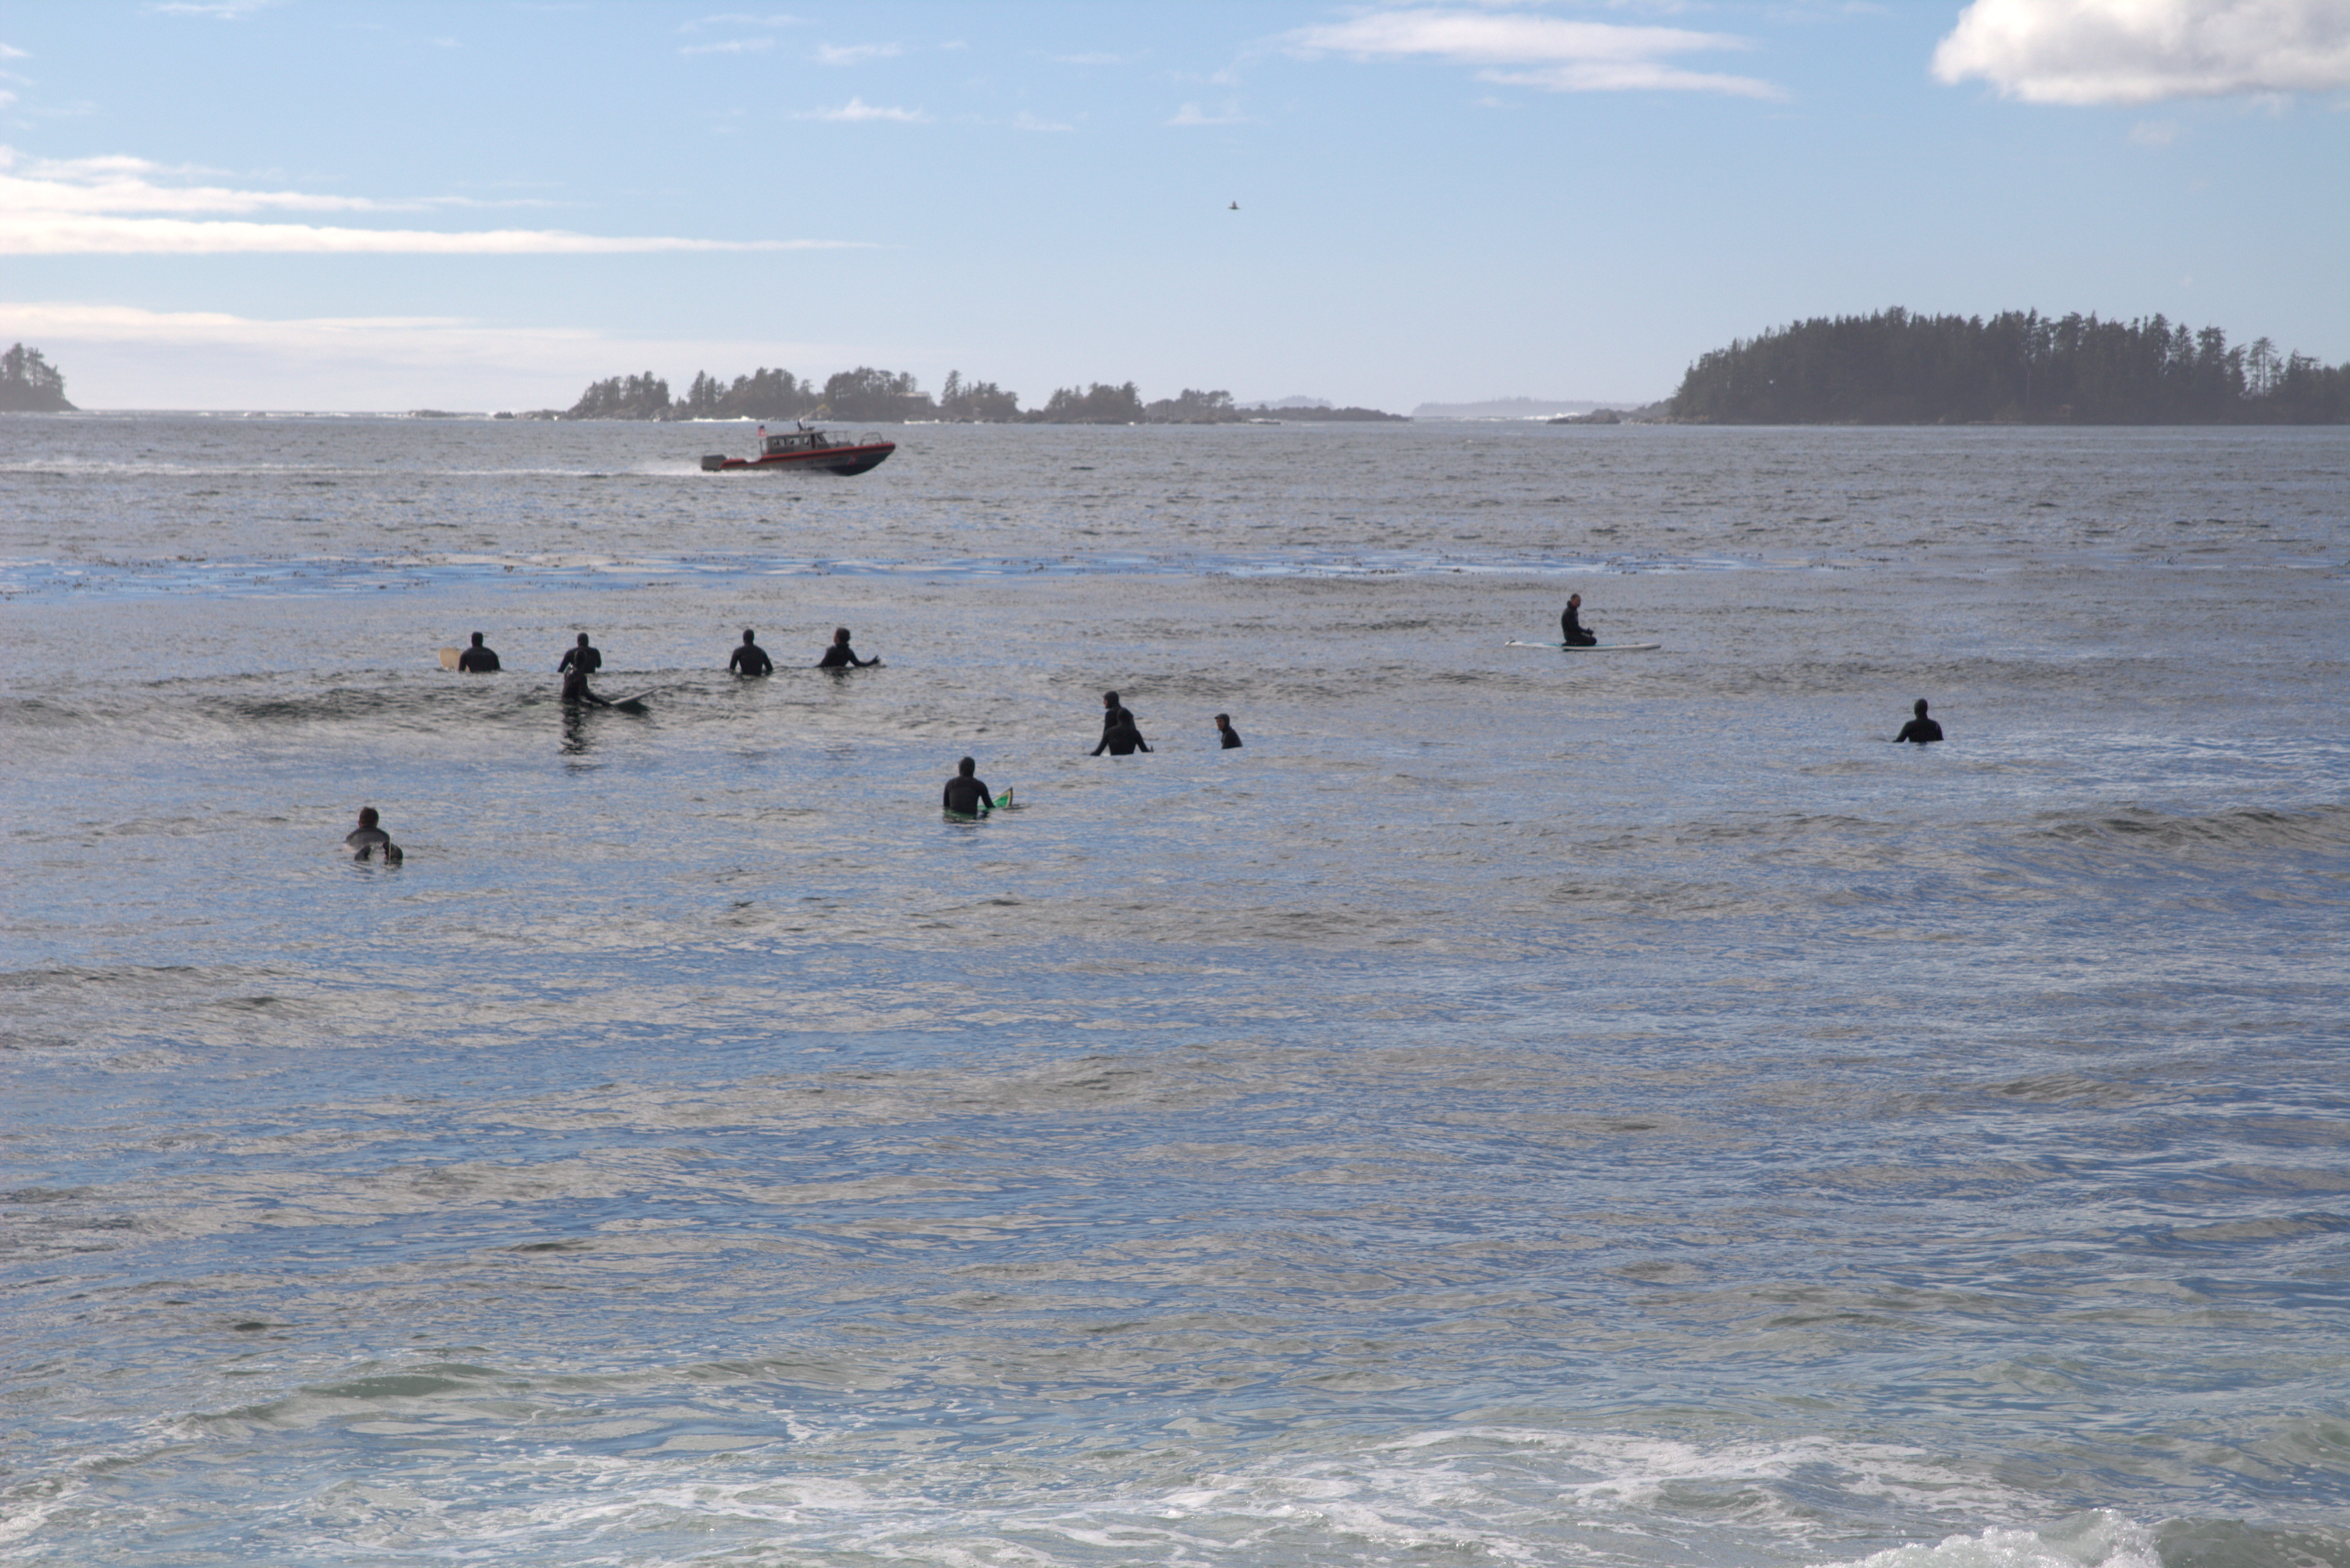 The surf community waits for a break as a boat cruises away from the harbor. (Photo by Brielle Schaeffer,KCAW - Sitka)